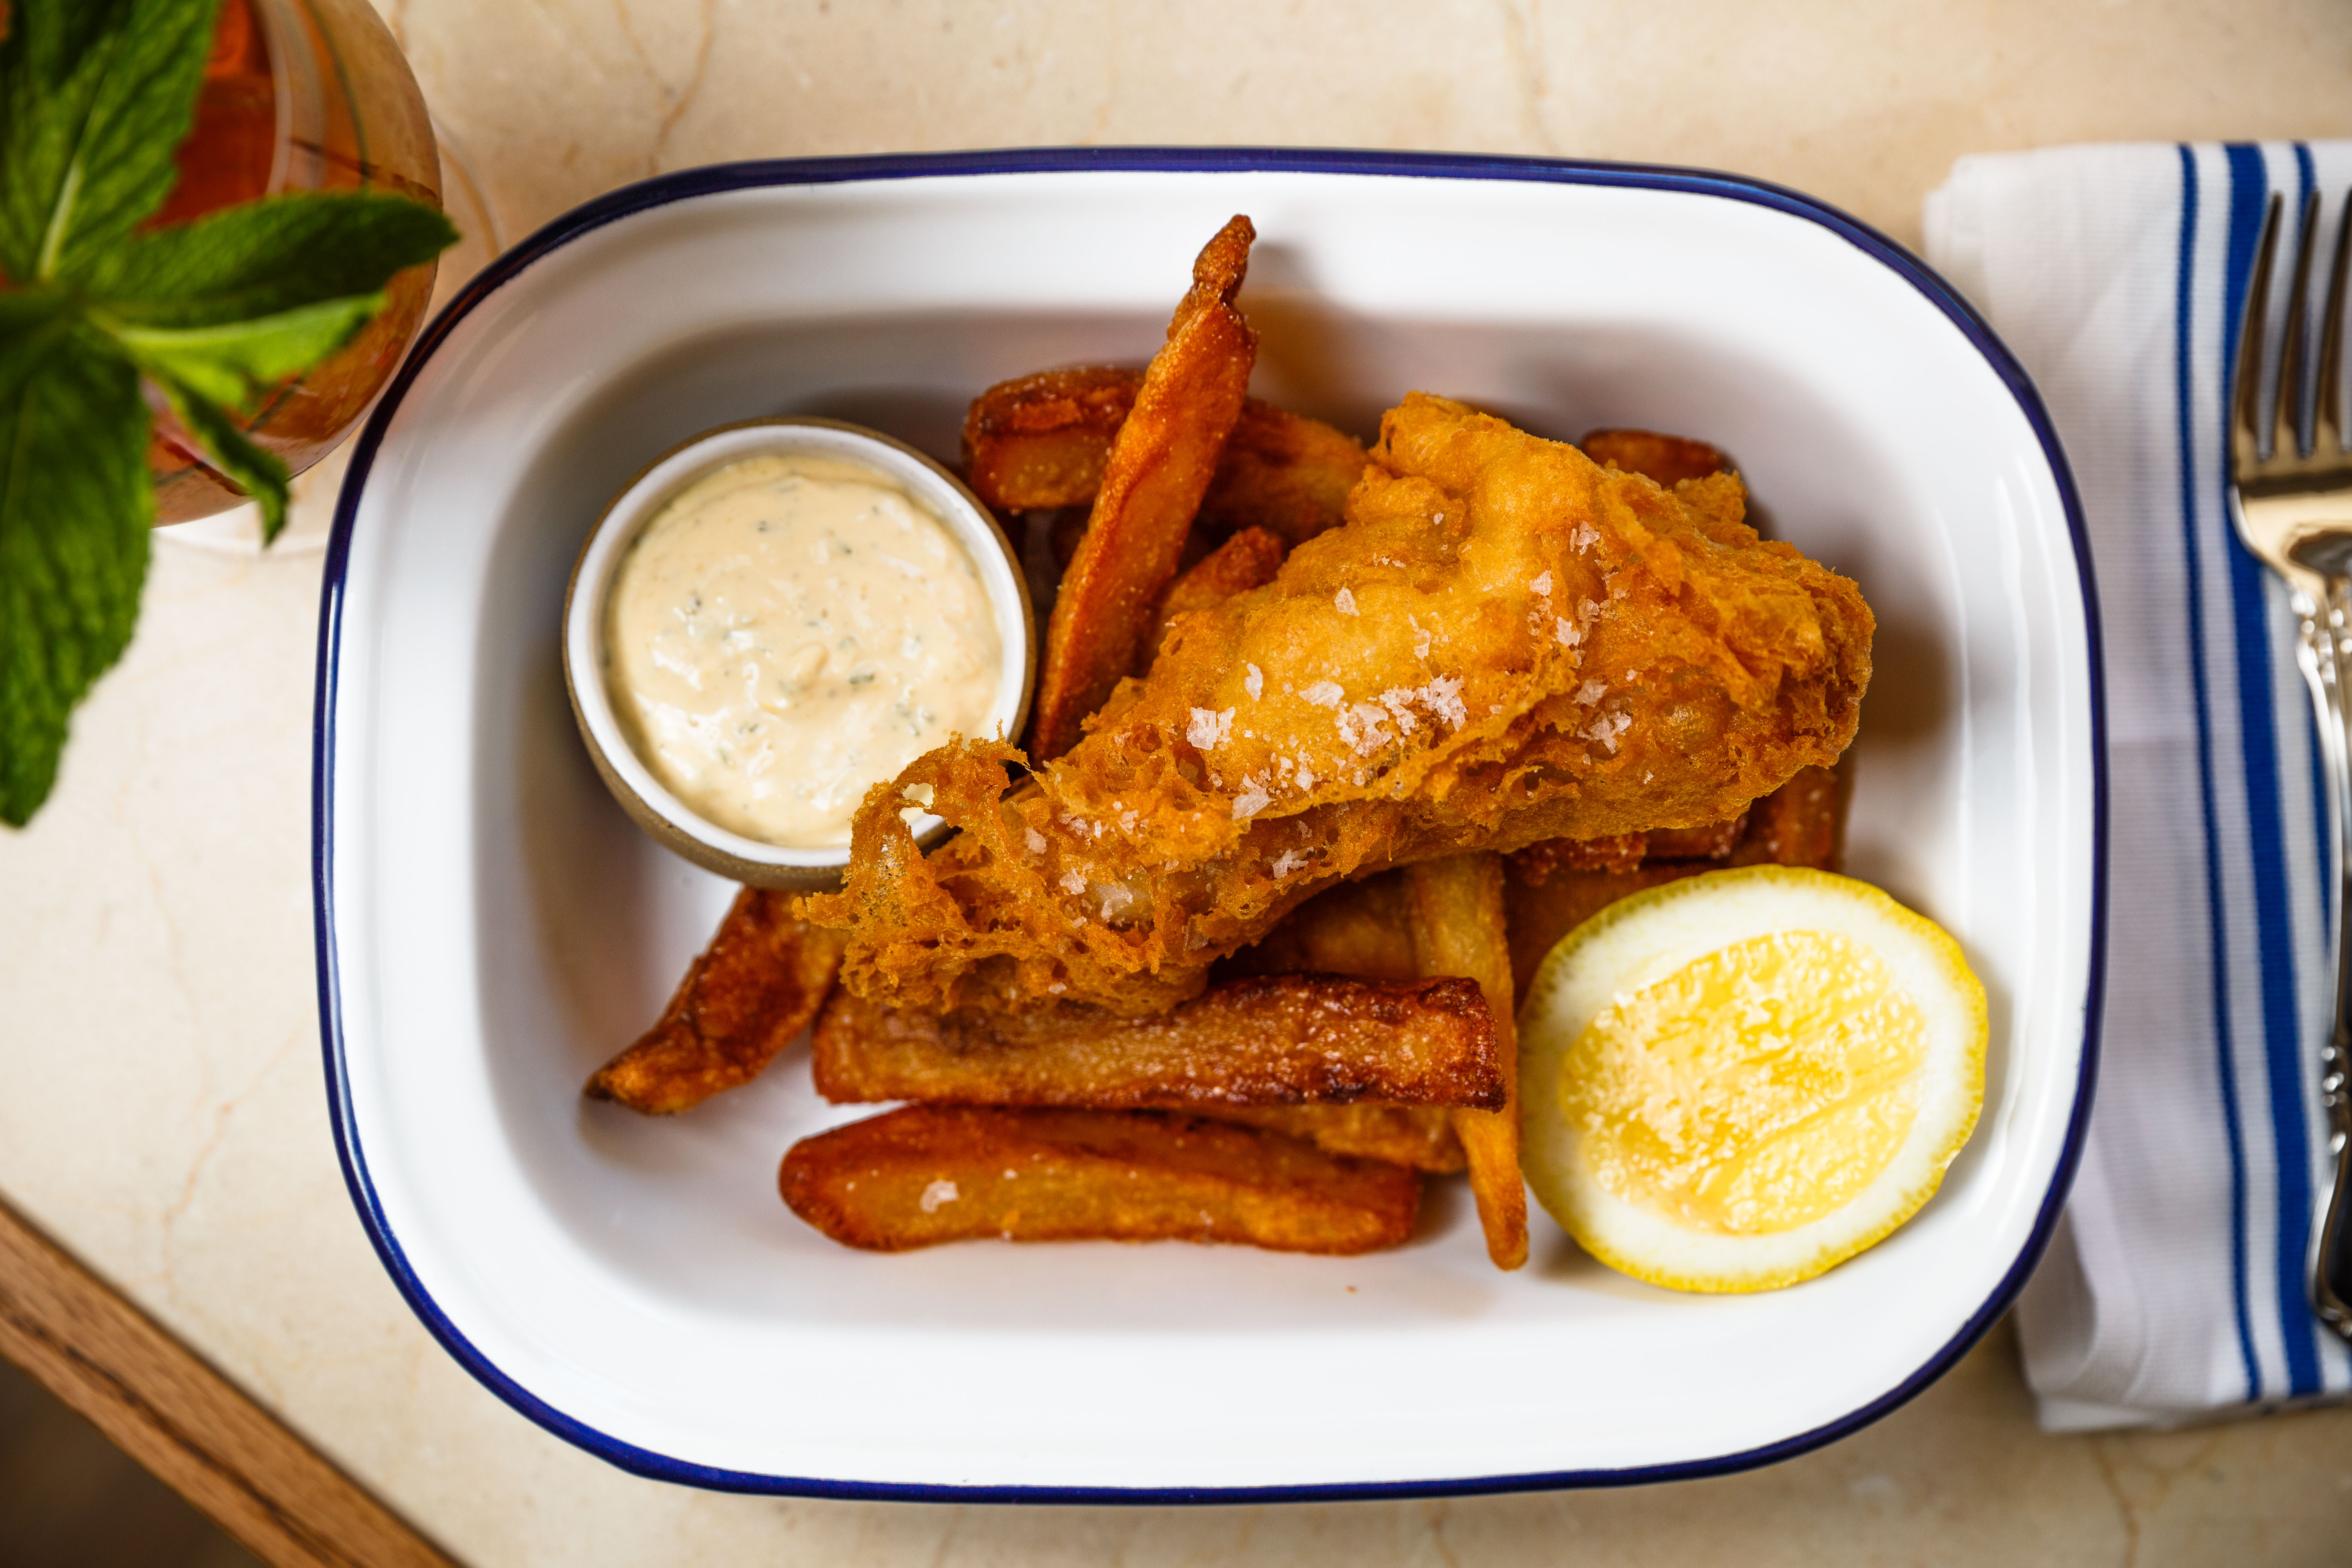 An overhead view of Dame’s fish and chips, featuring a large serving of fried hake, french fries, a ramekin of tartar sauce, and a lemon wedge.